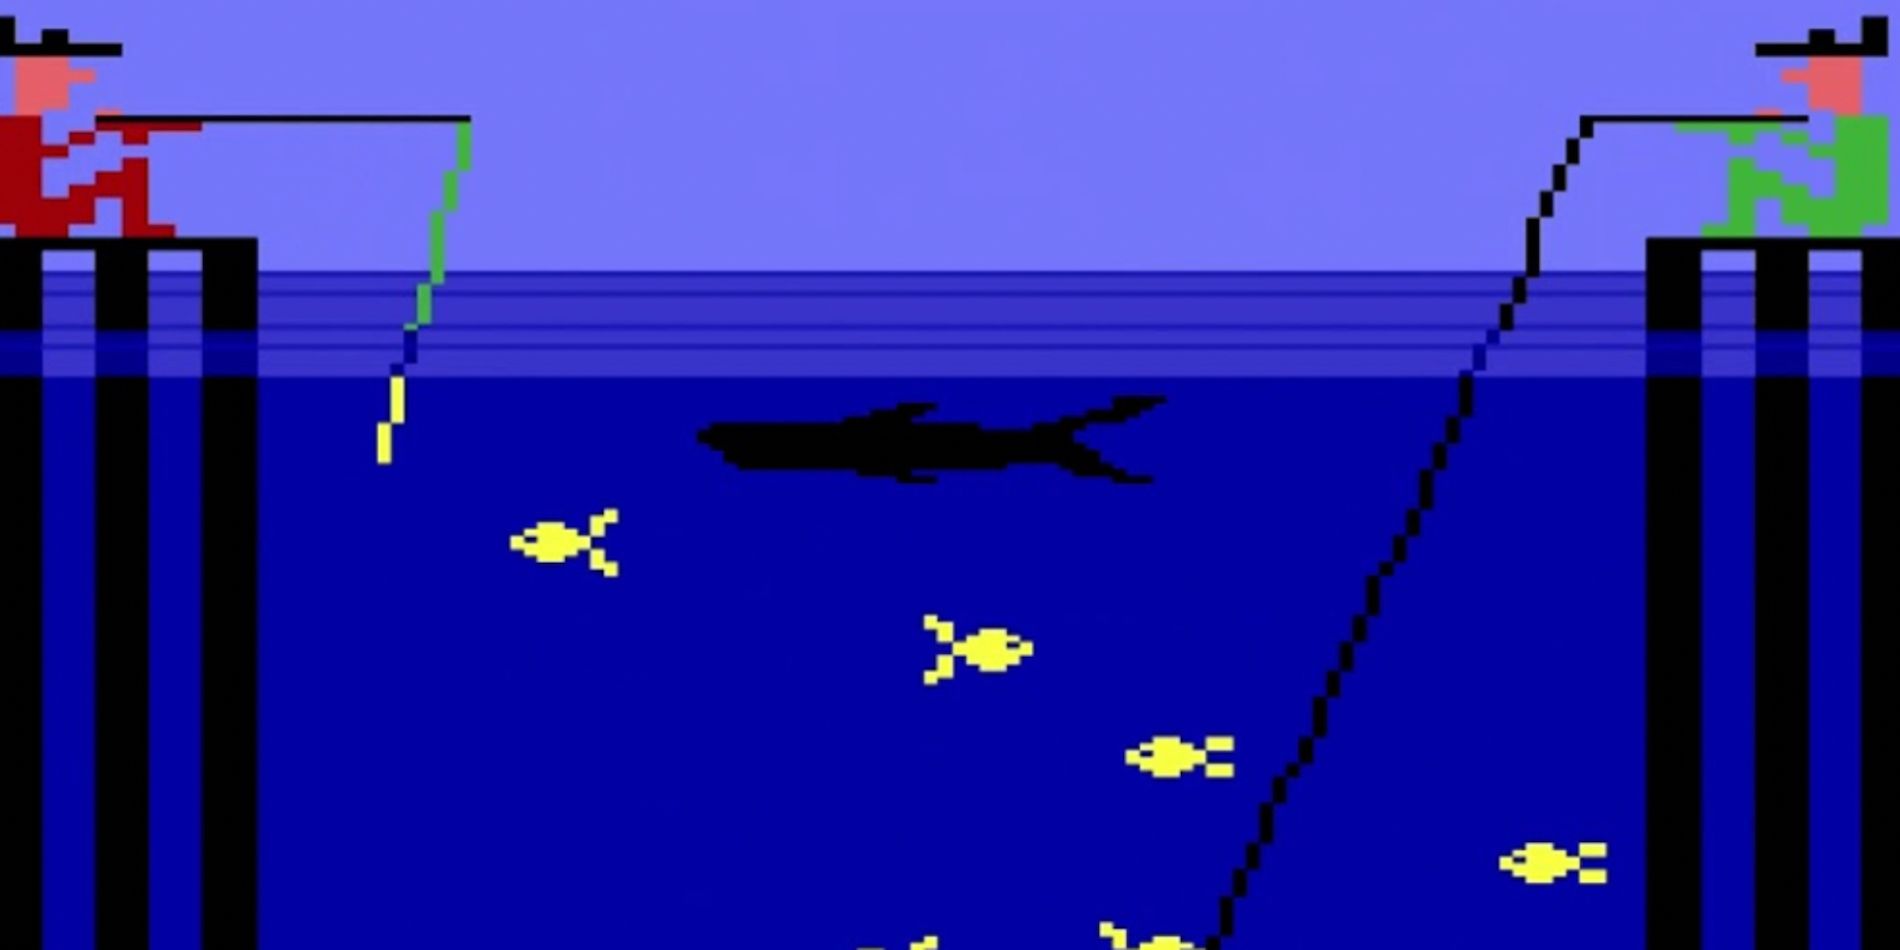 A fishing game from 32 in 1 for the Atari 2600